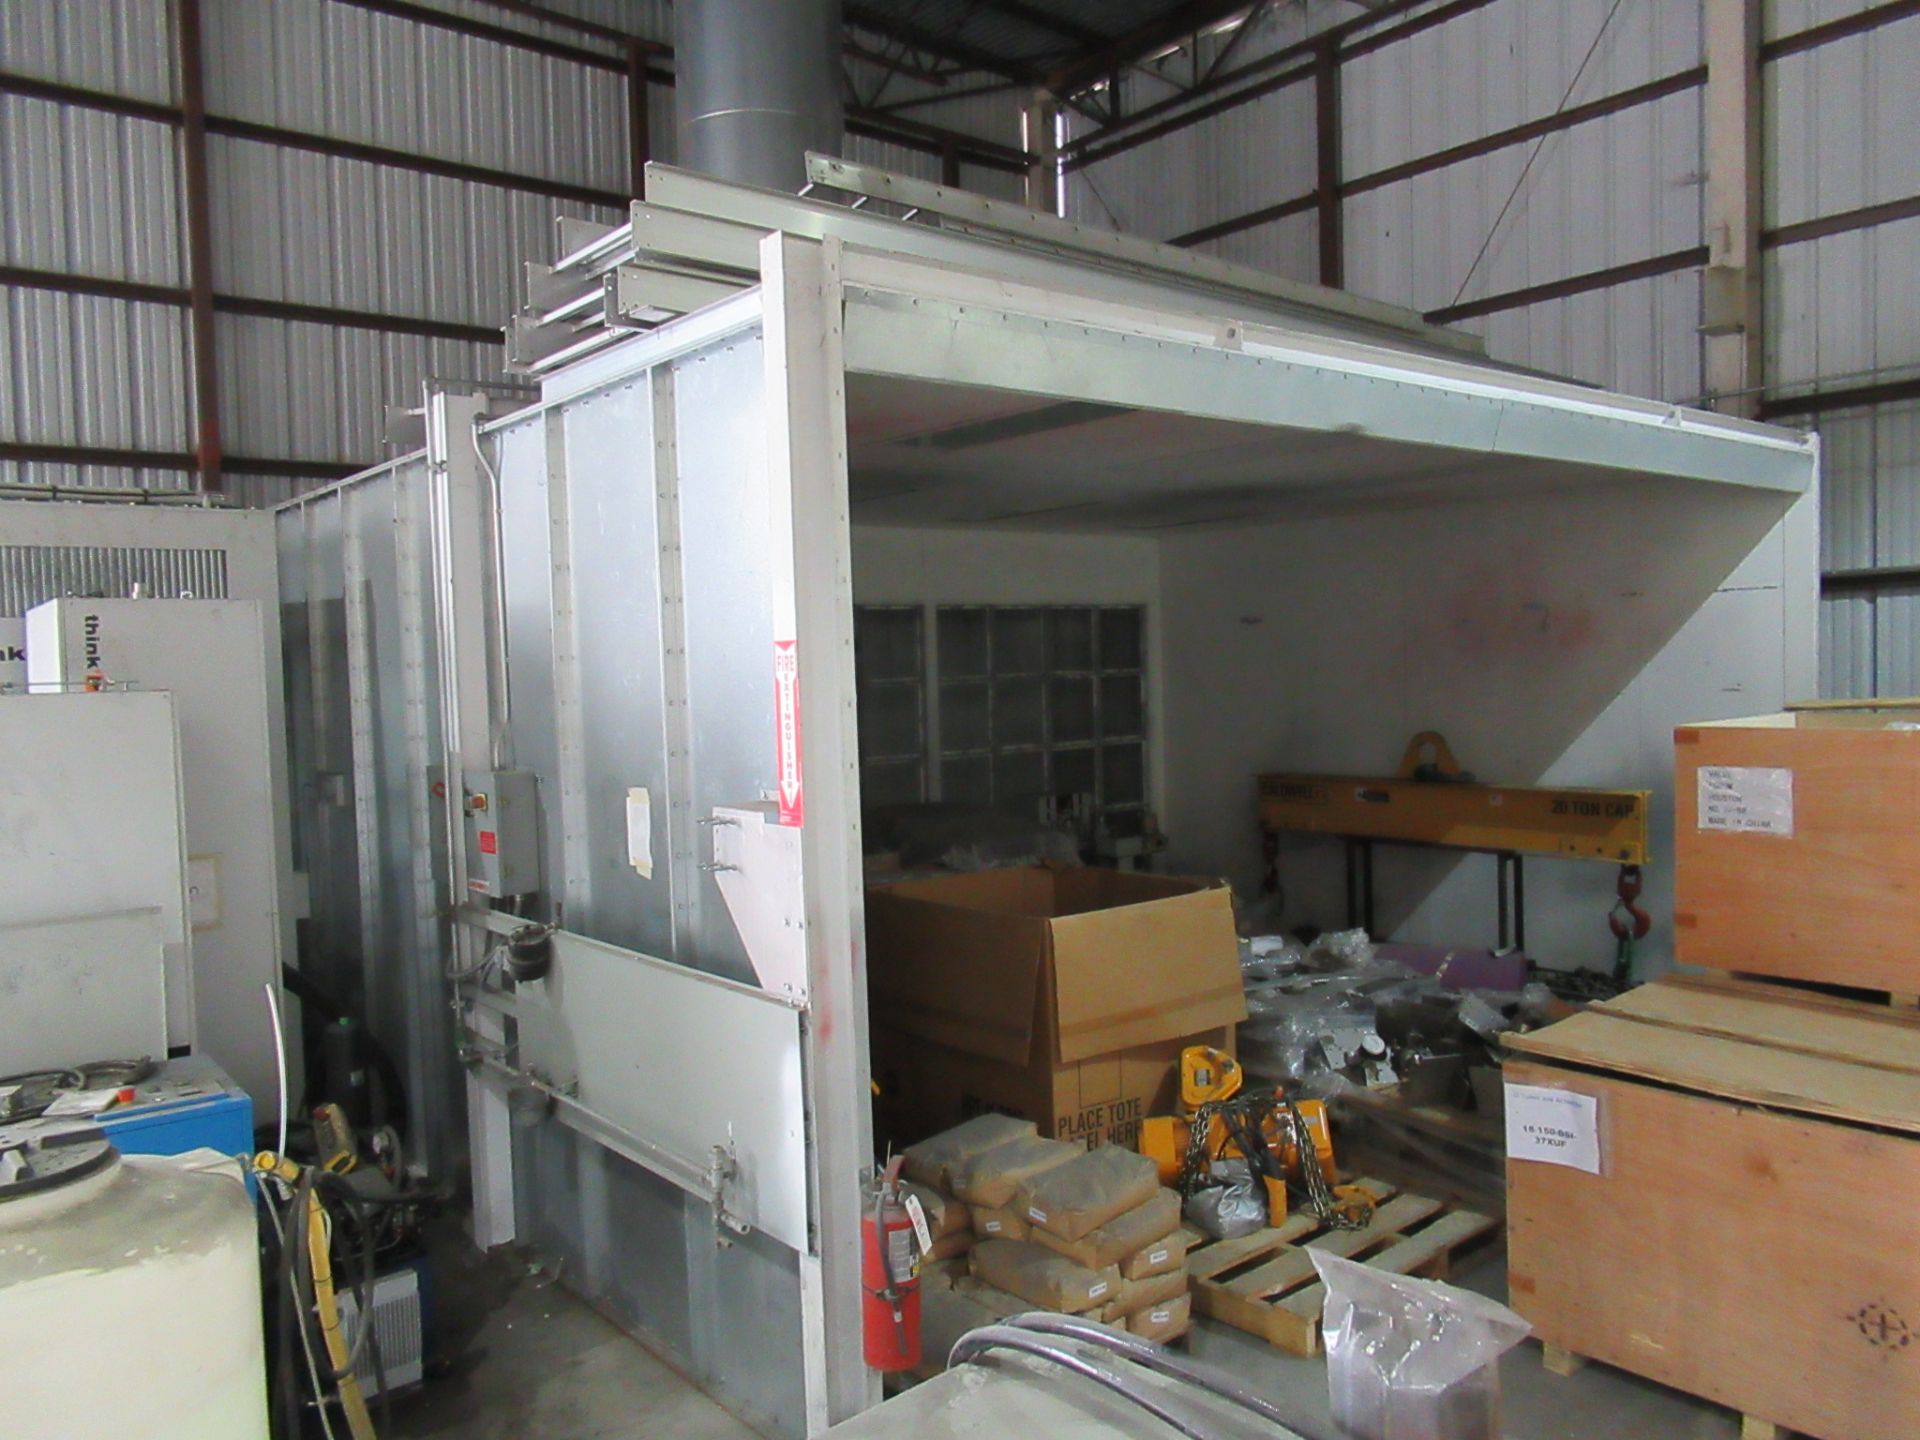 CUSTOM, PAINT BOOTH, 3-sided, 20’ x 16’ x 10’ ht., exhaust system, lights, MCI controls. (Location